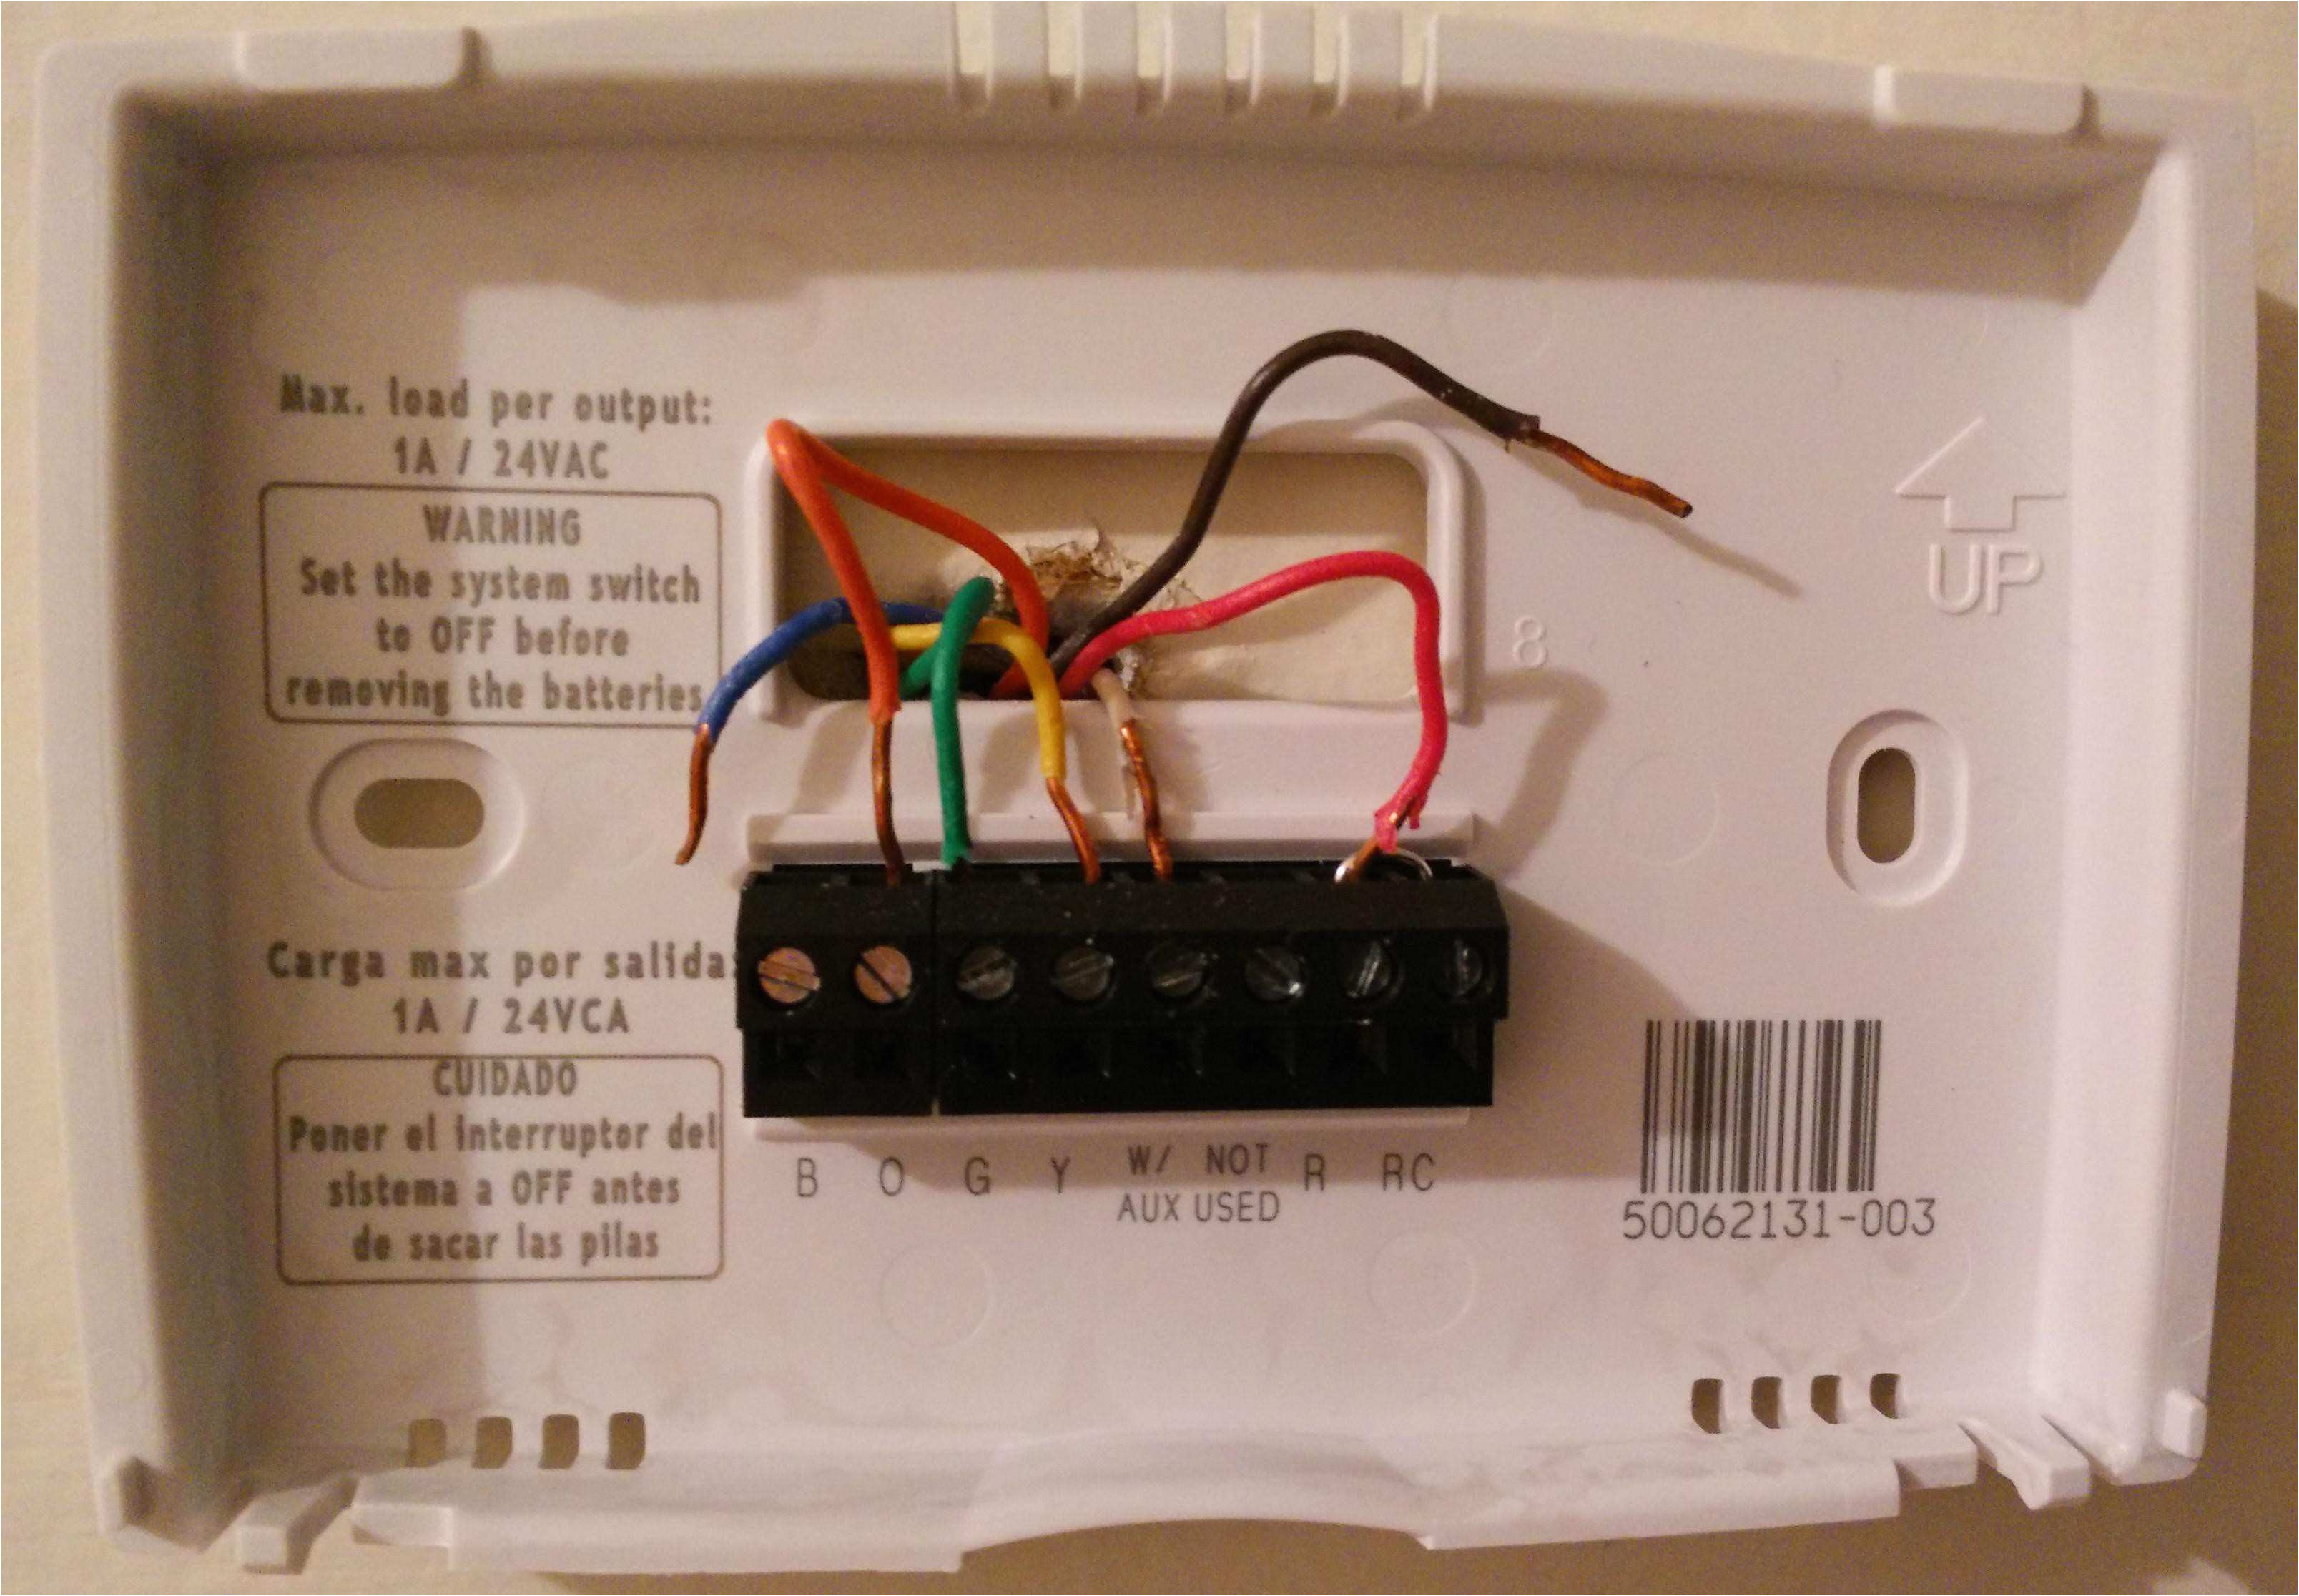 wiring diagram for honeywell programmable thermostat wiring honeywell programmable thermostat likewise honeywell thermostat wiring